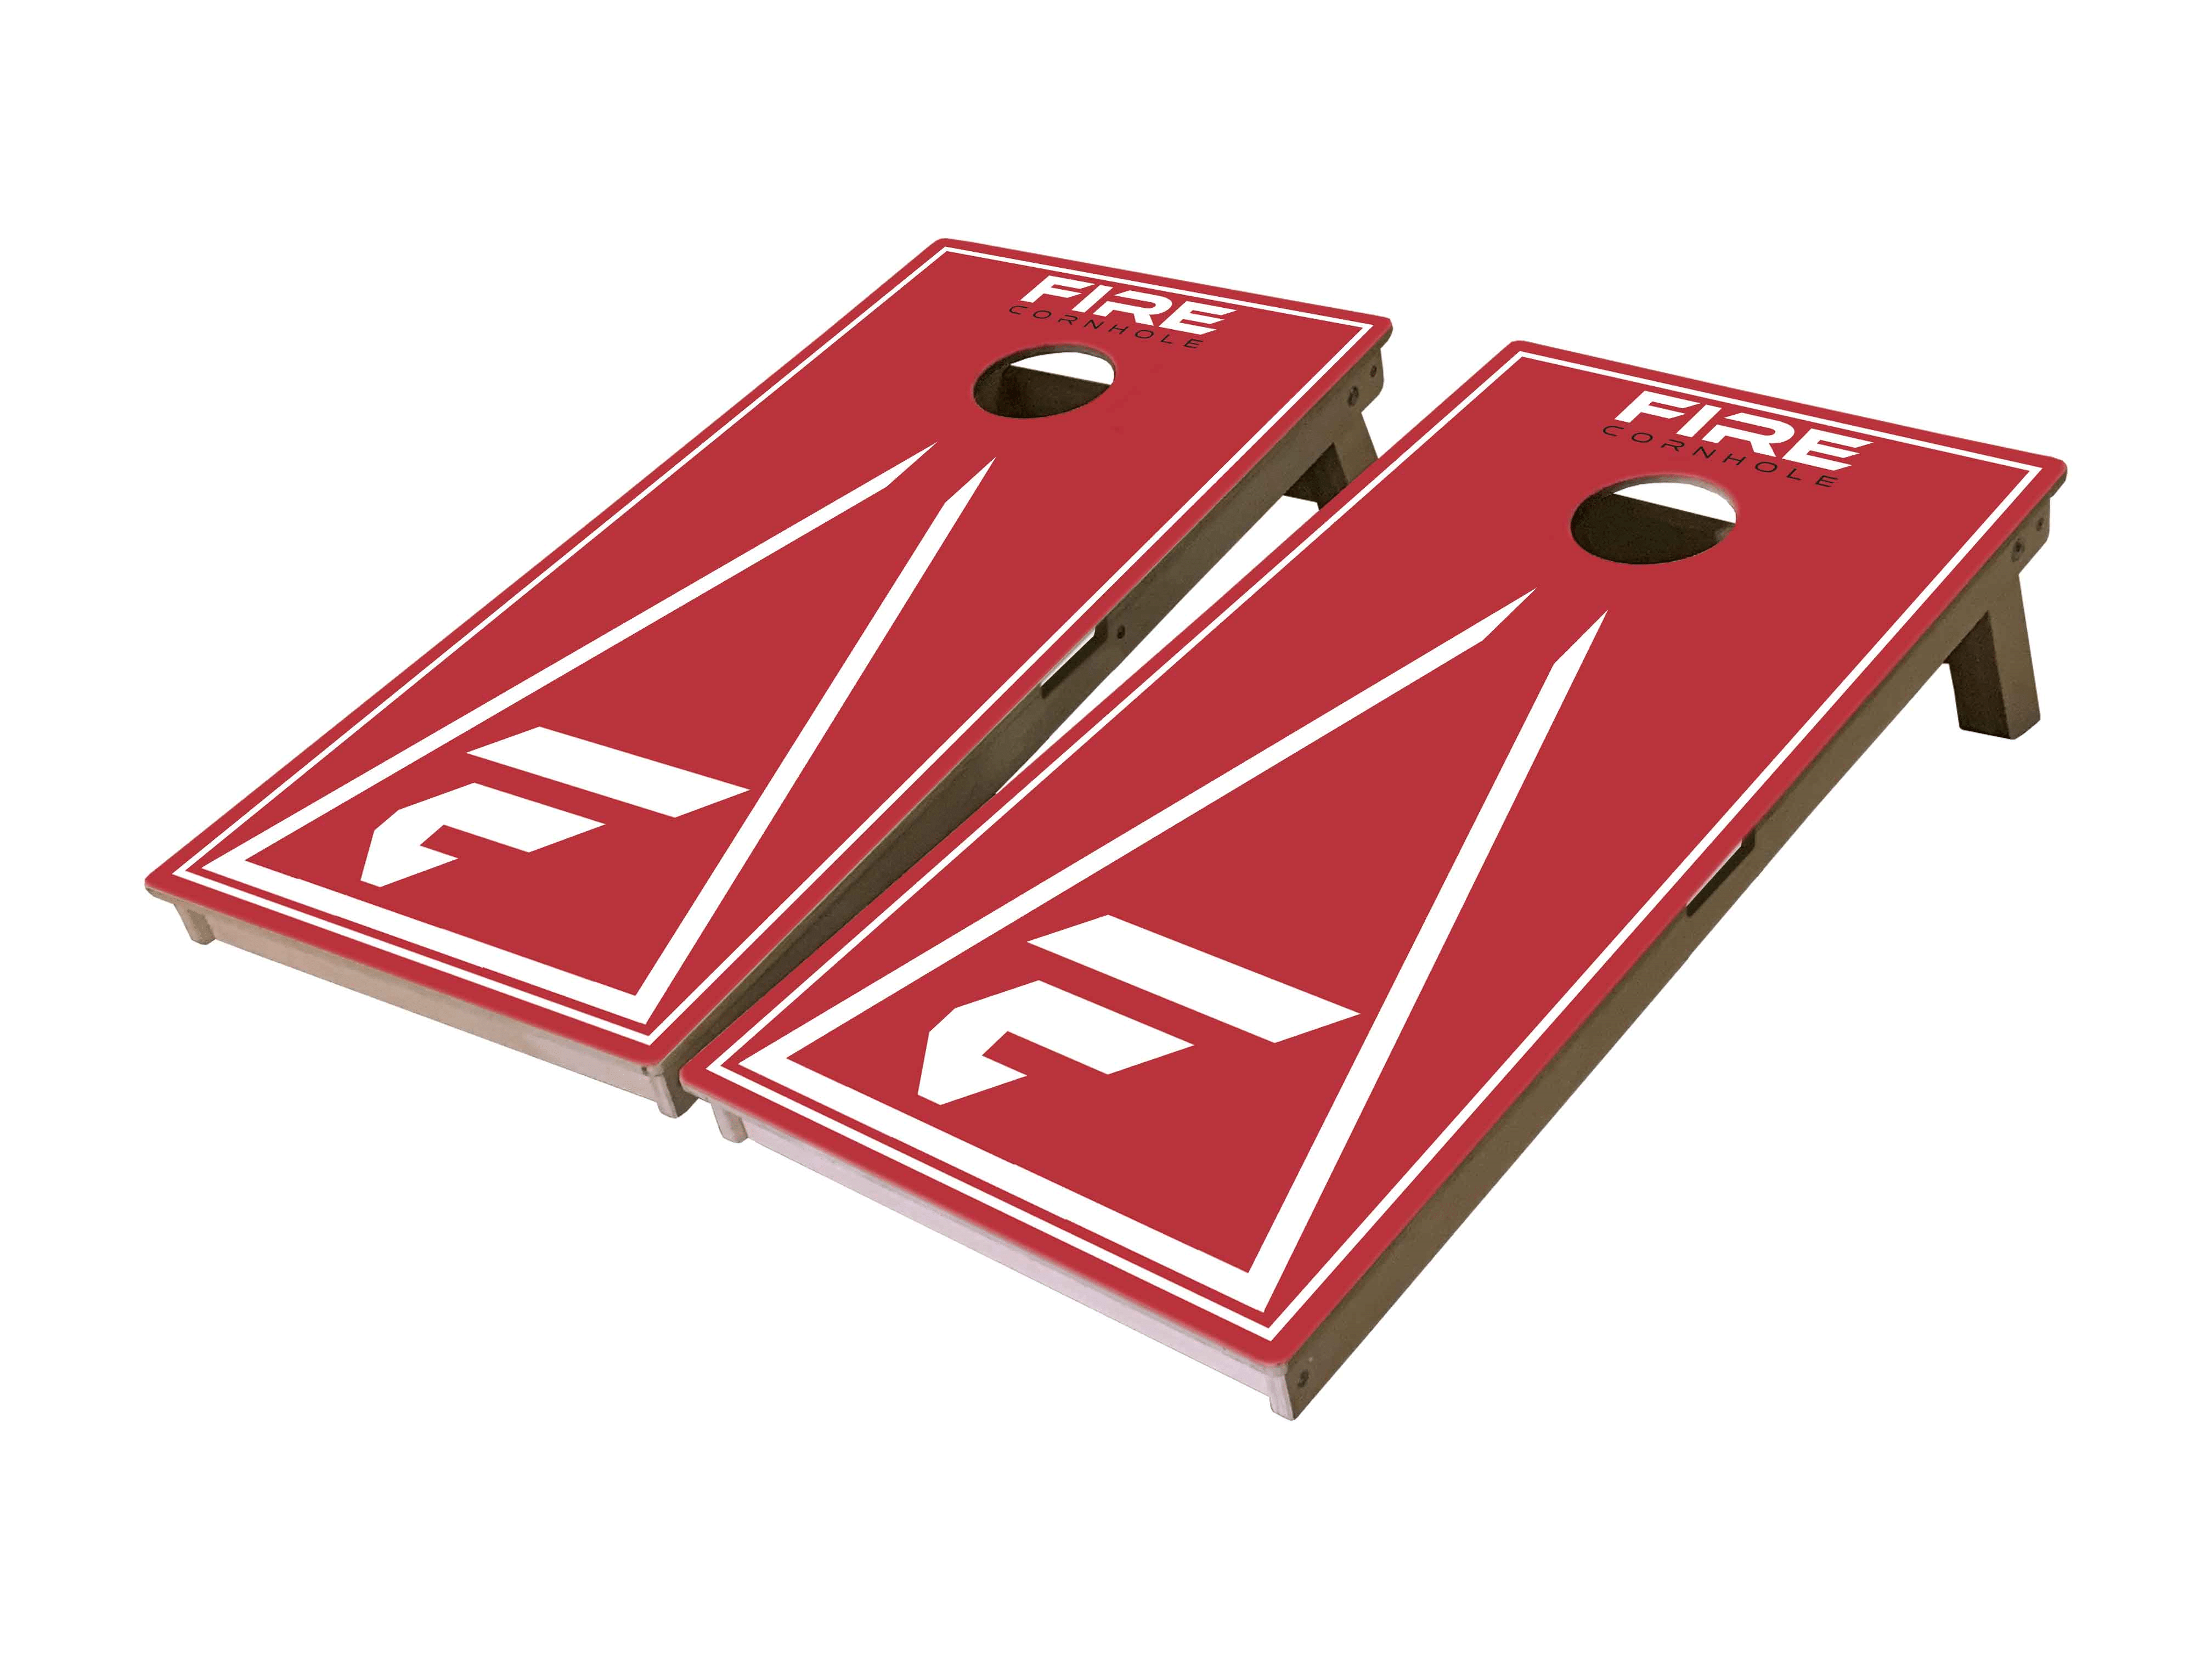 Fire Cornhole boards in red with white "F" logo